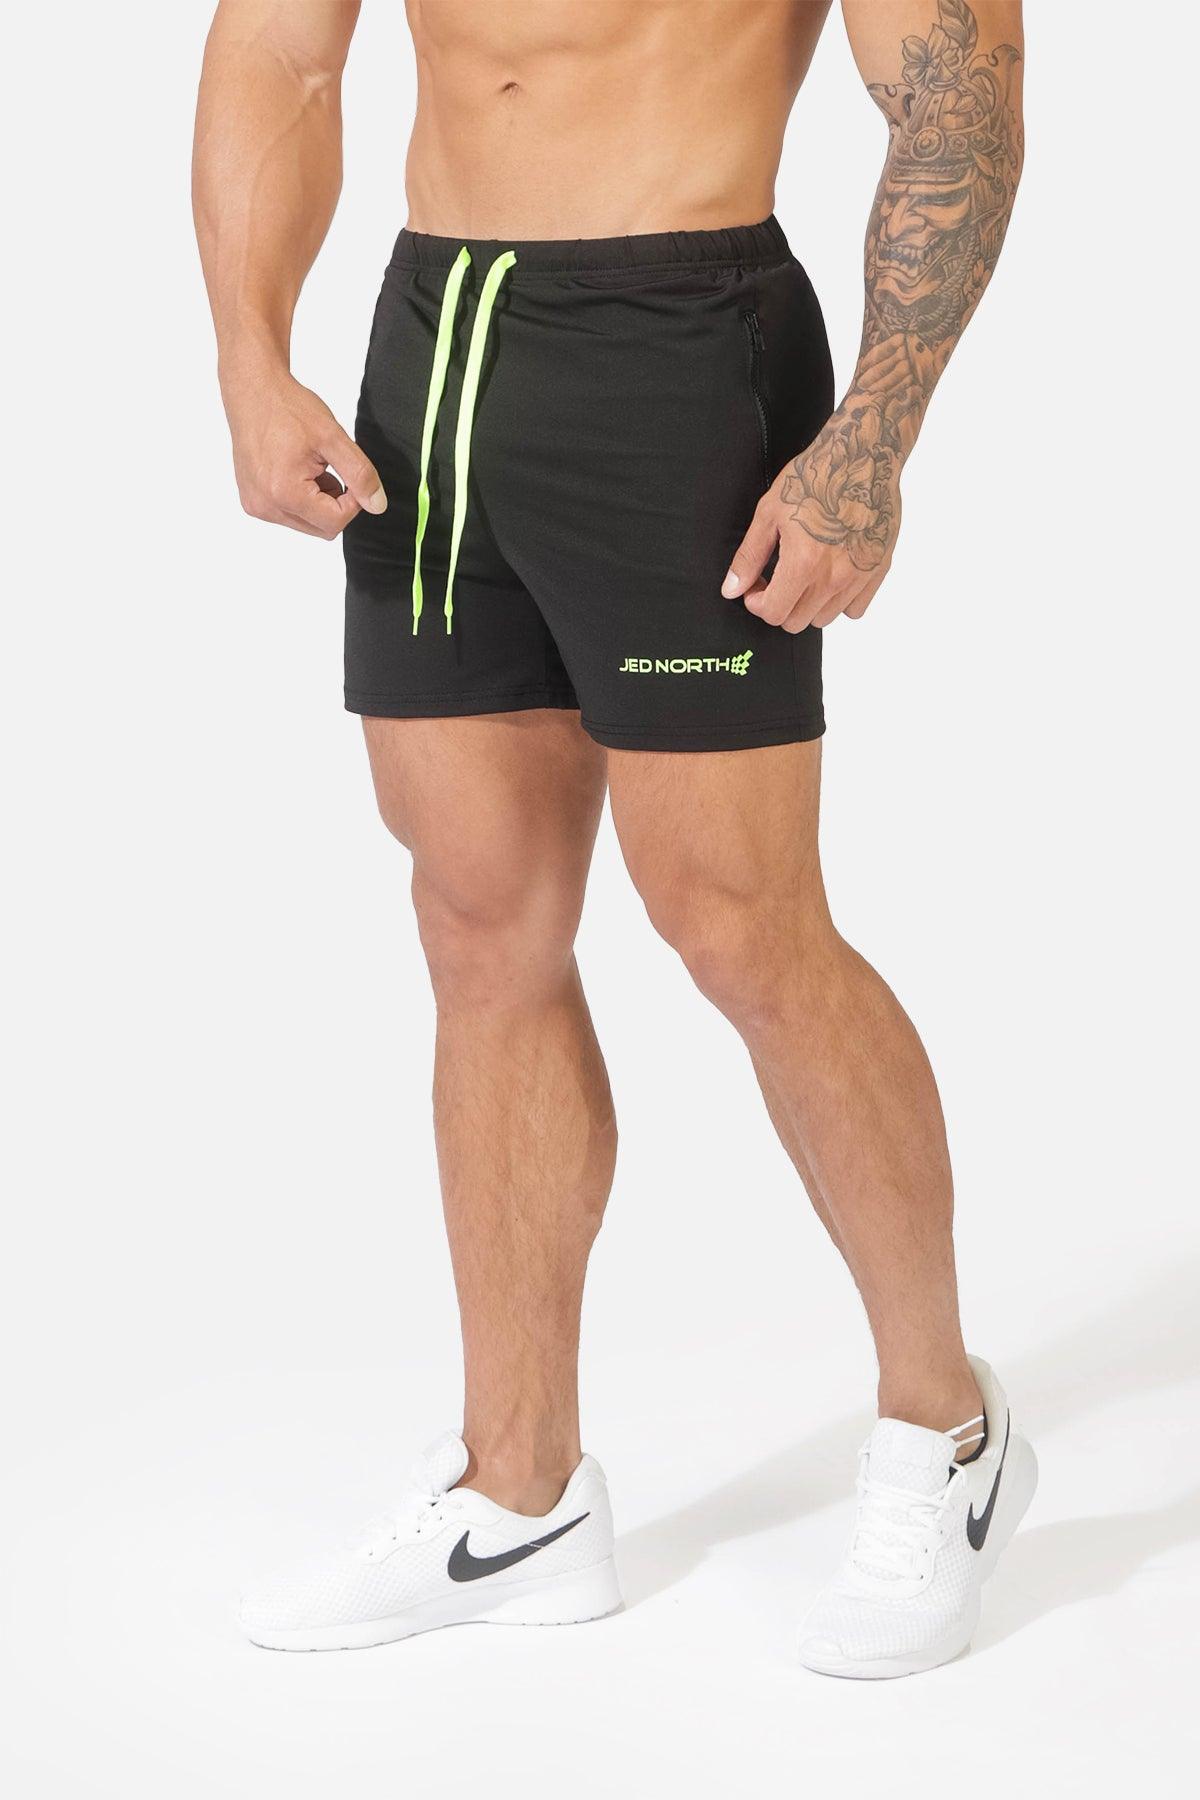 Jed North Men's Fitted 4 Shorts Bodybuilding Workout Gym Running Tight  Lifting Shorts